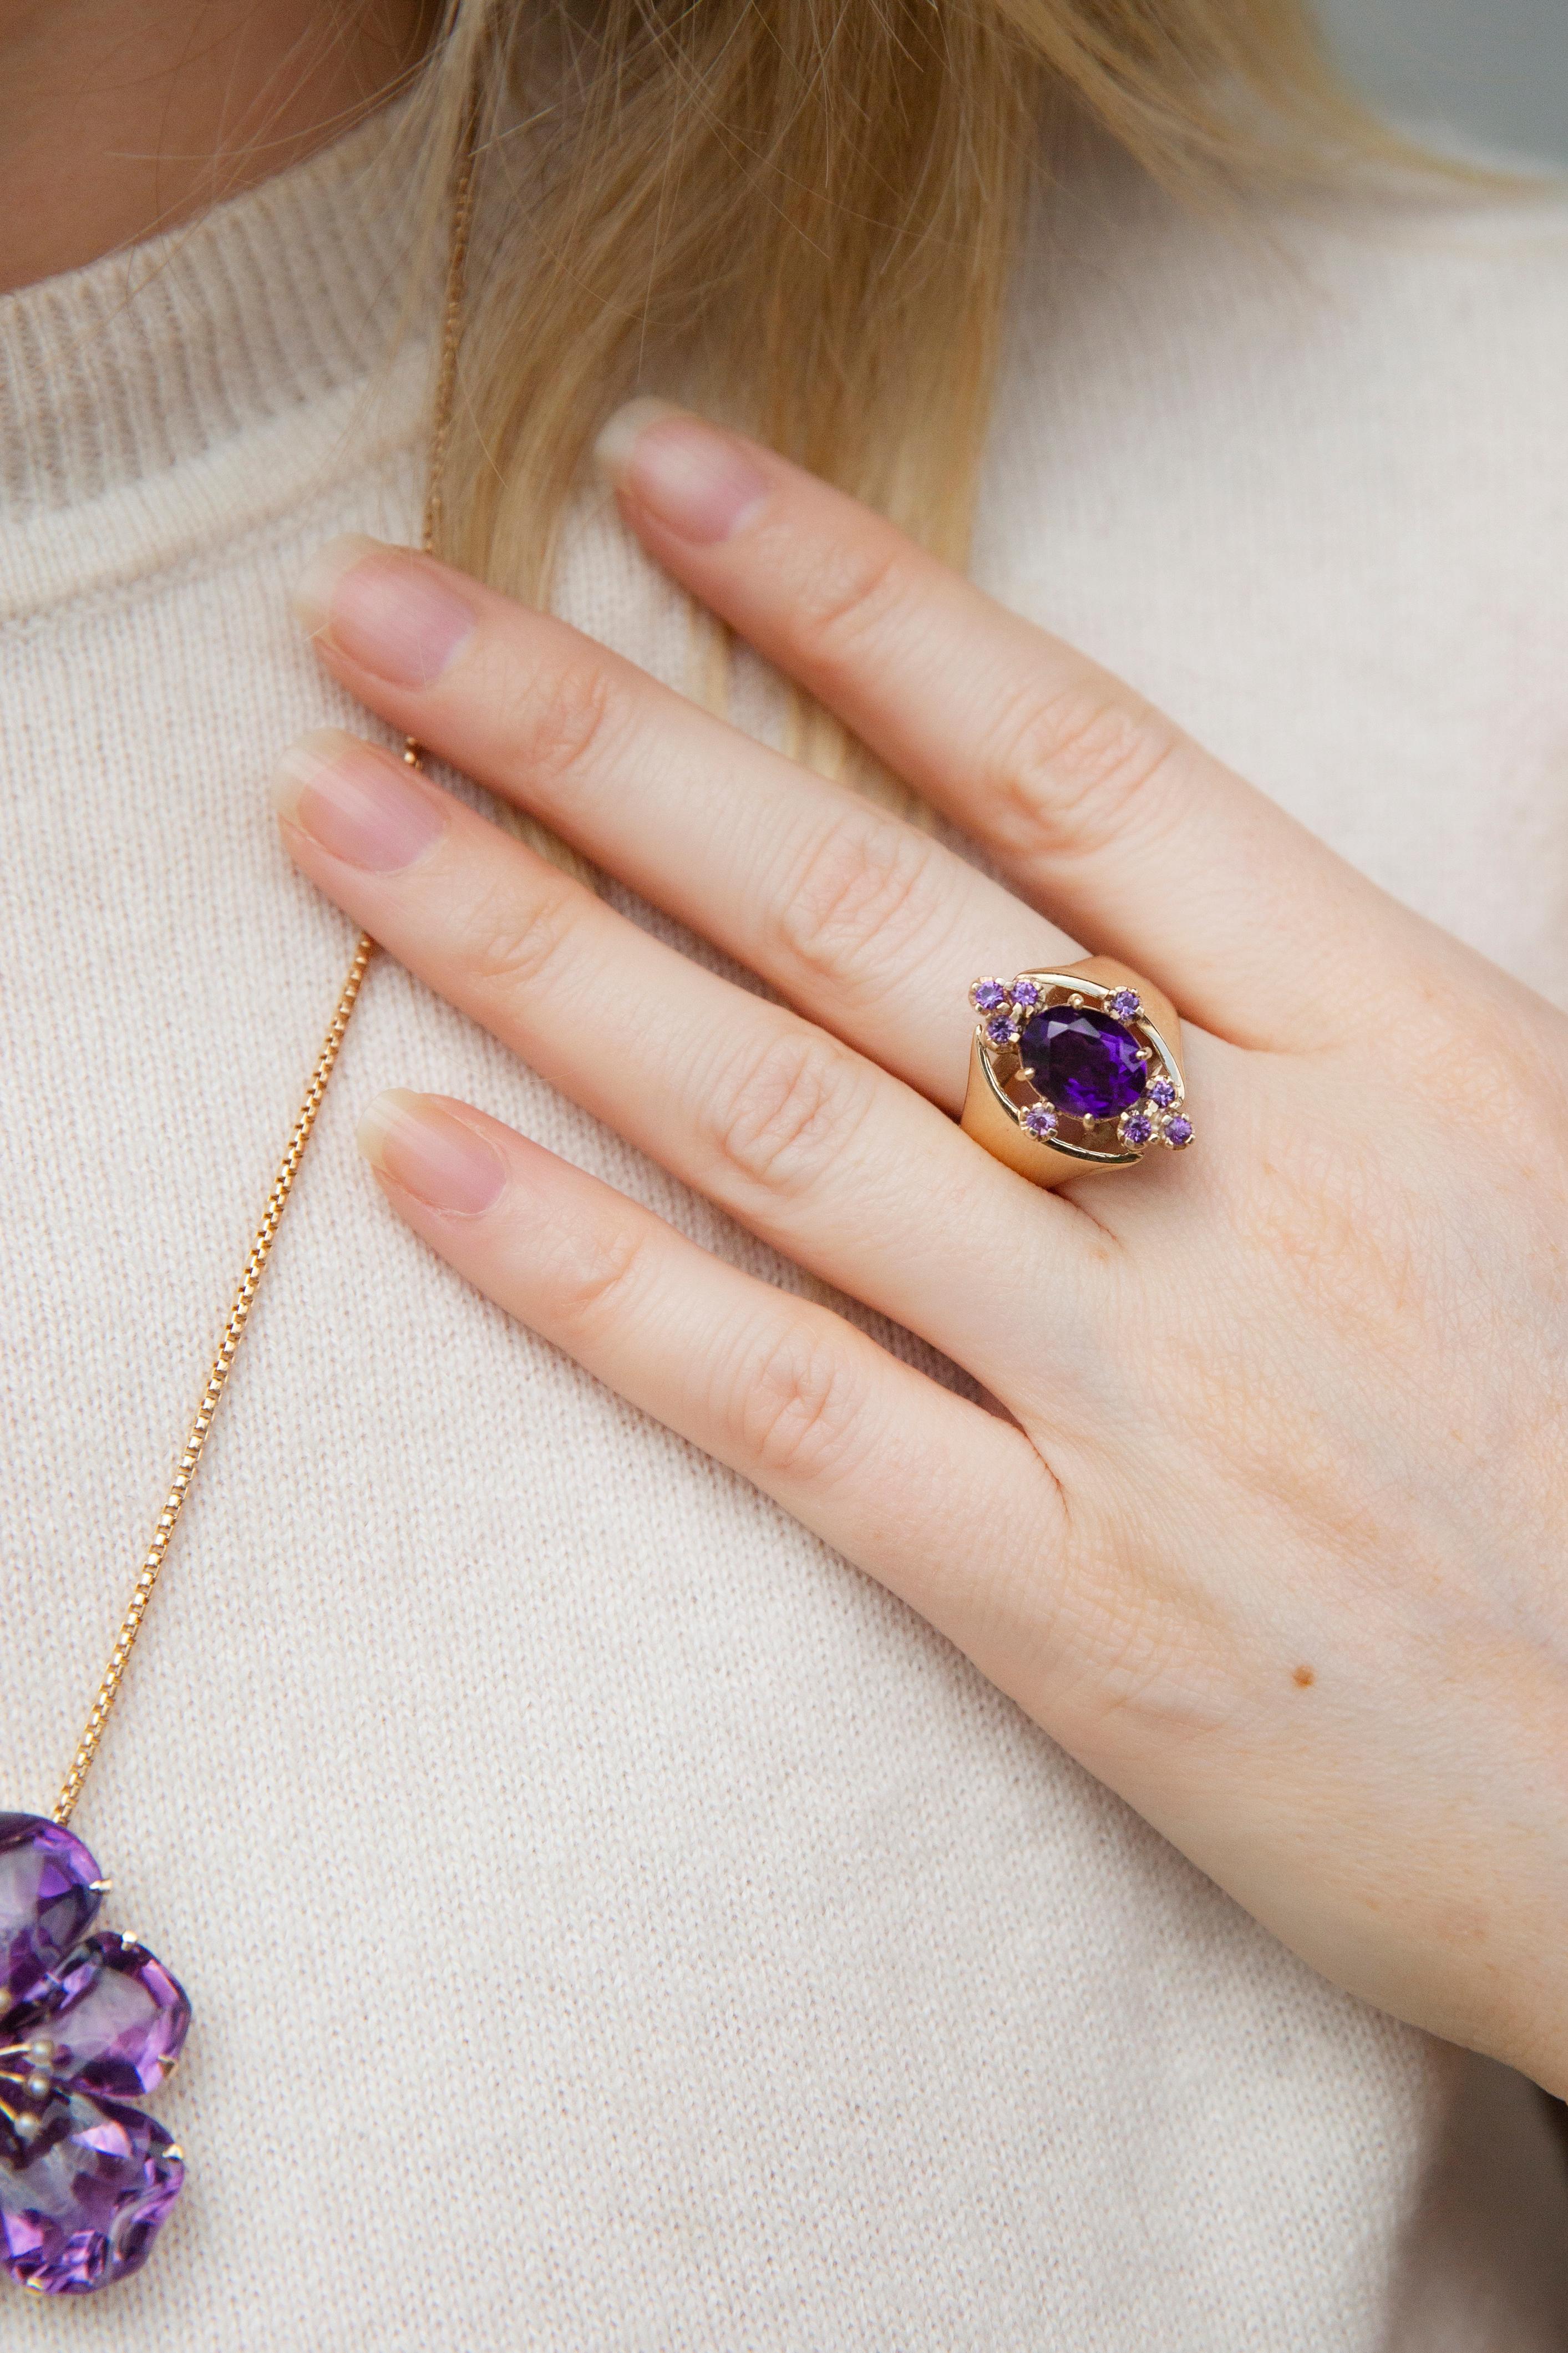 Vintage Circa 1970s Deep Purple Amethyst Cluster Cocktail Ring 9 Carat Gold For Sale 1